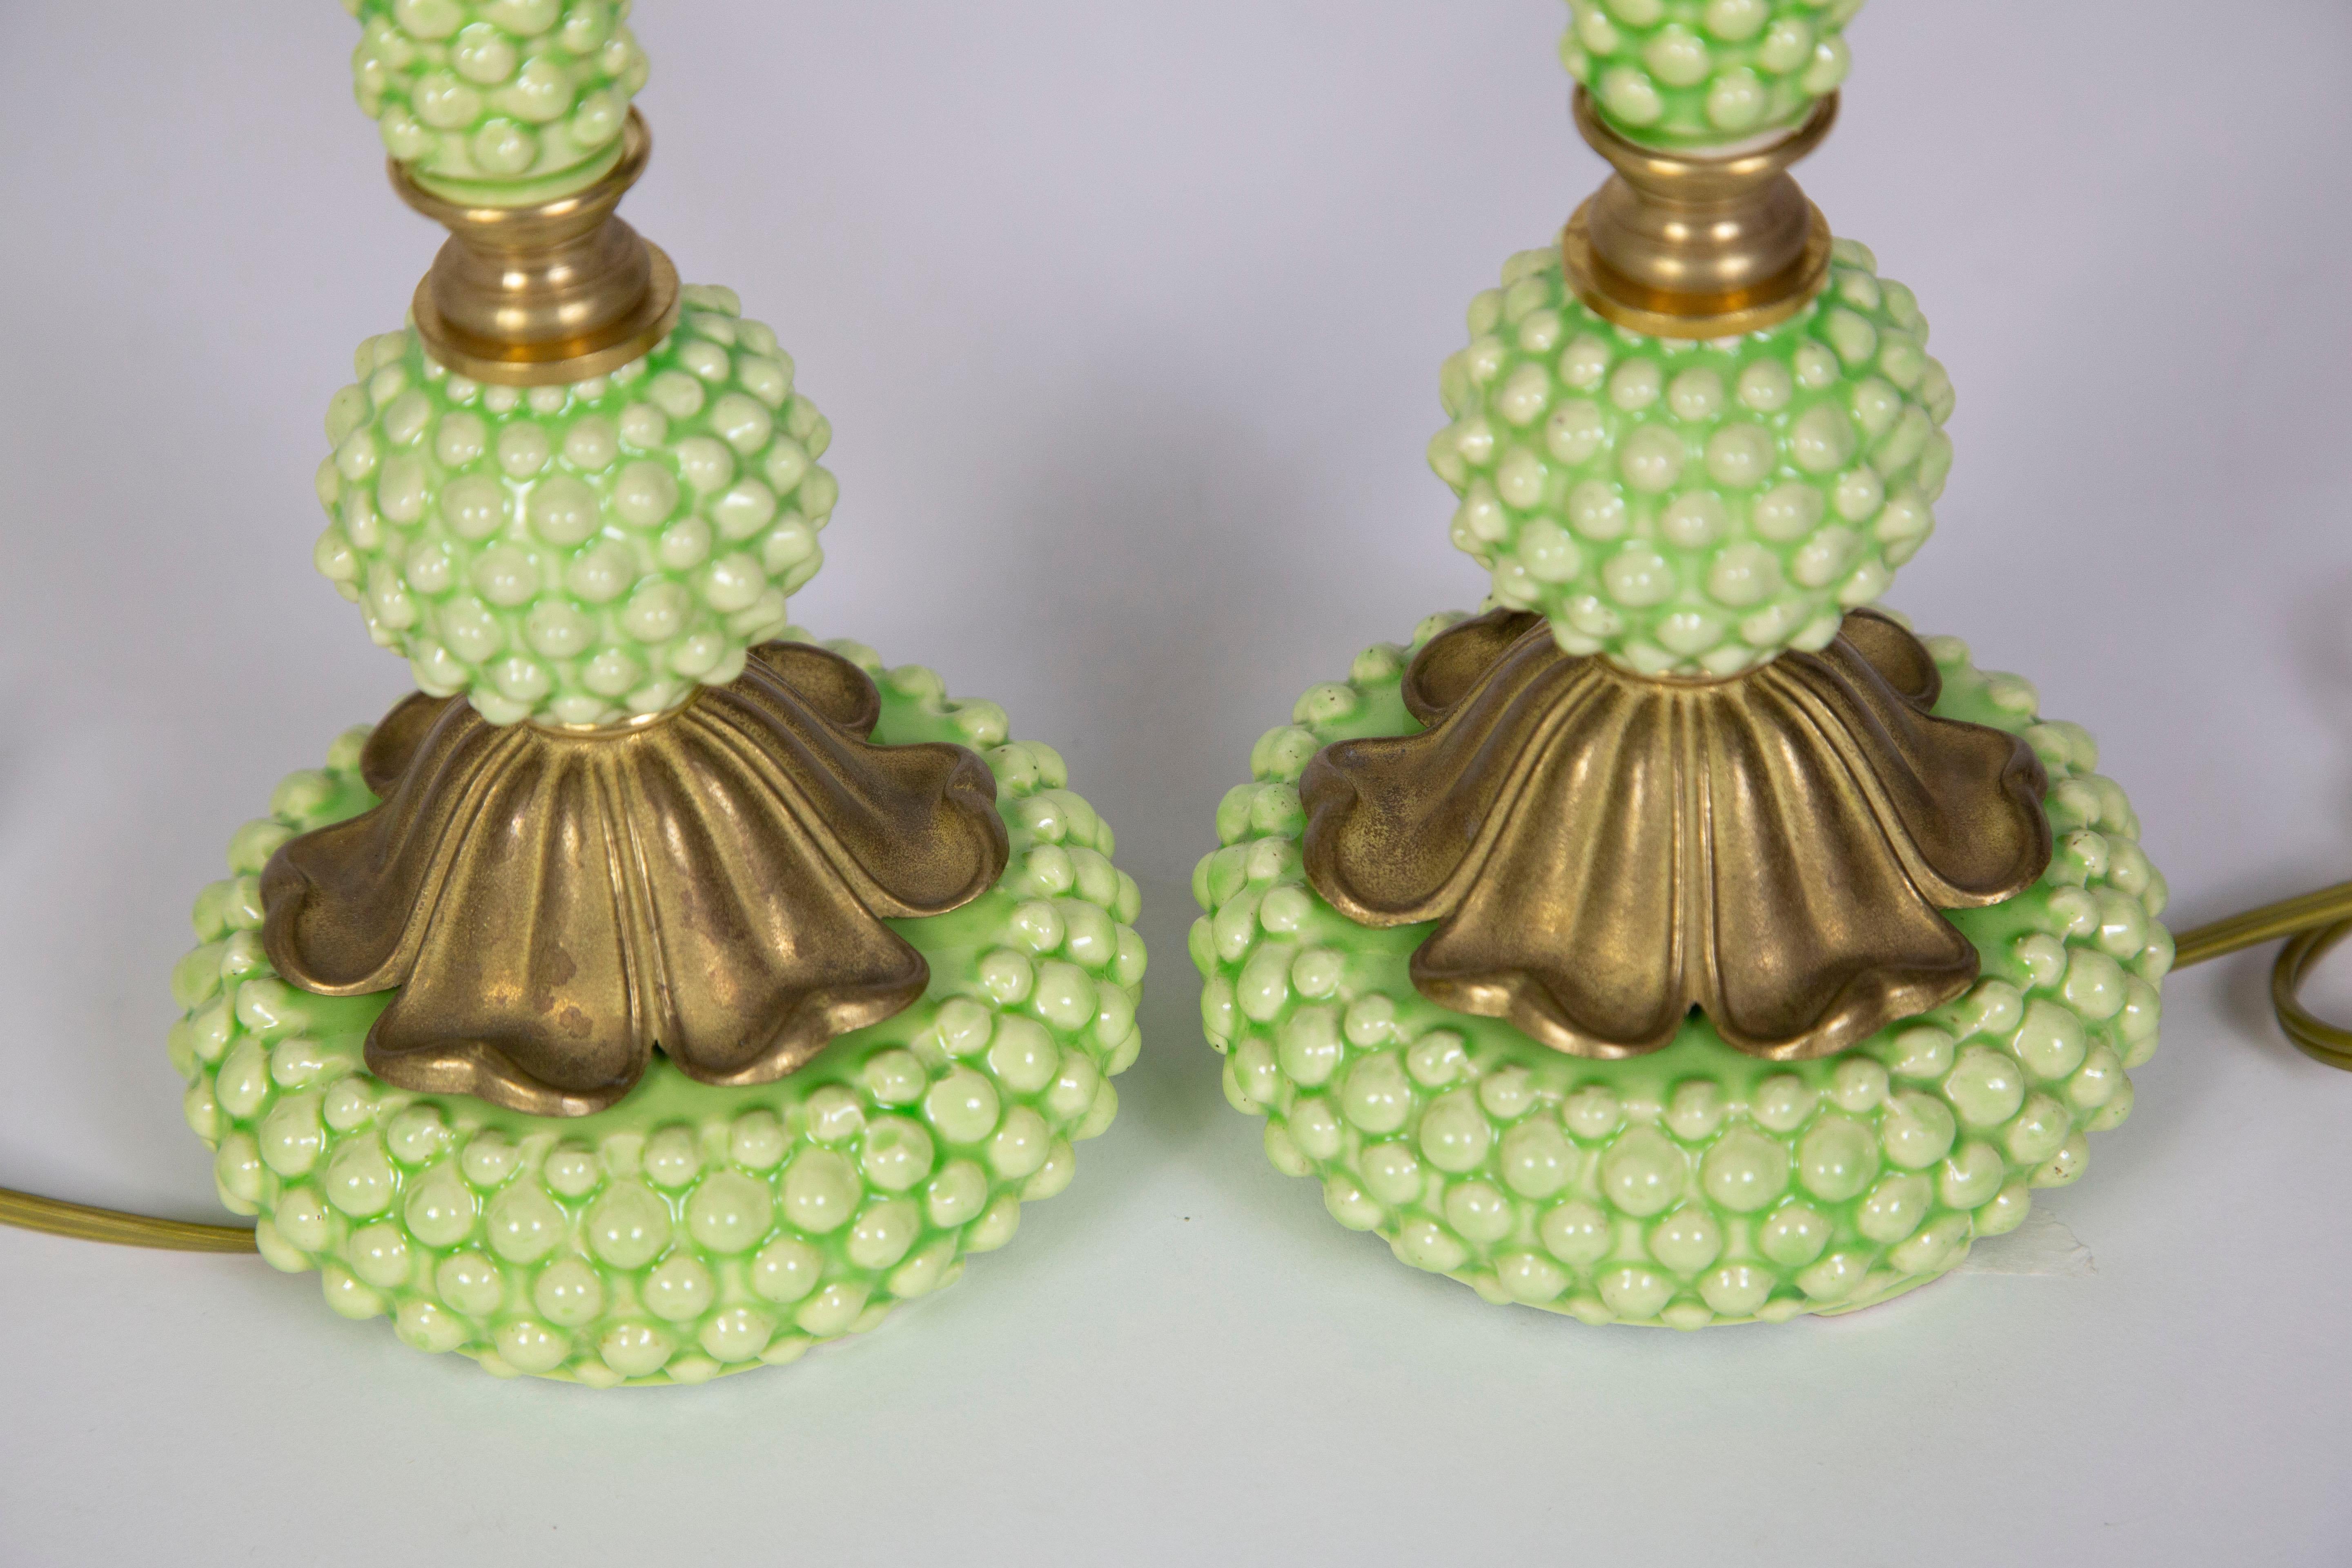 Midcentury, hobnail ceramic lamps in a mod mint - chartreuse green. We rewired them to include pull chain sockets and updated brass accents. They are perfect for side tables and nightstands; petite in size. Matching brass color, plastic cord. Use a